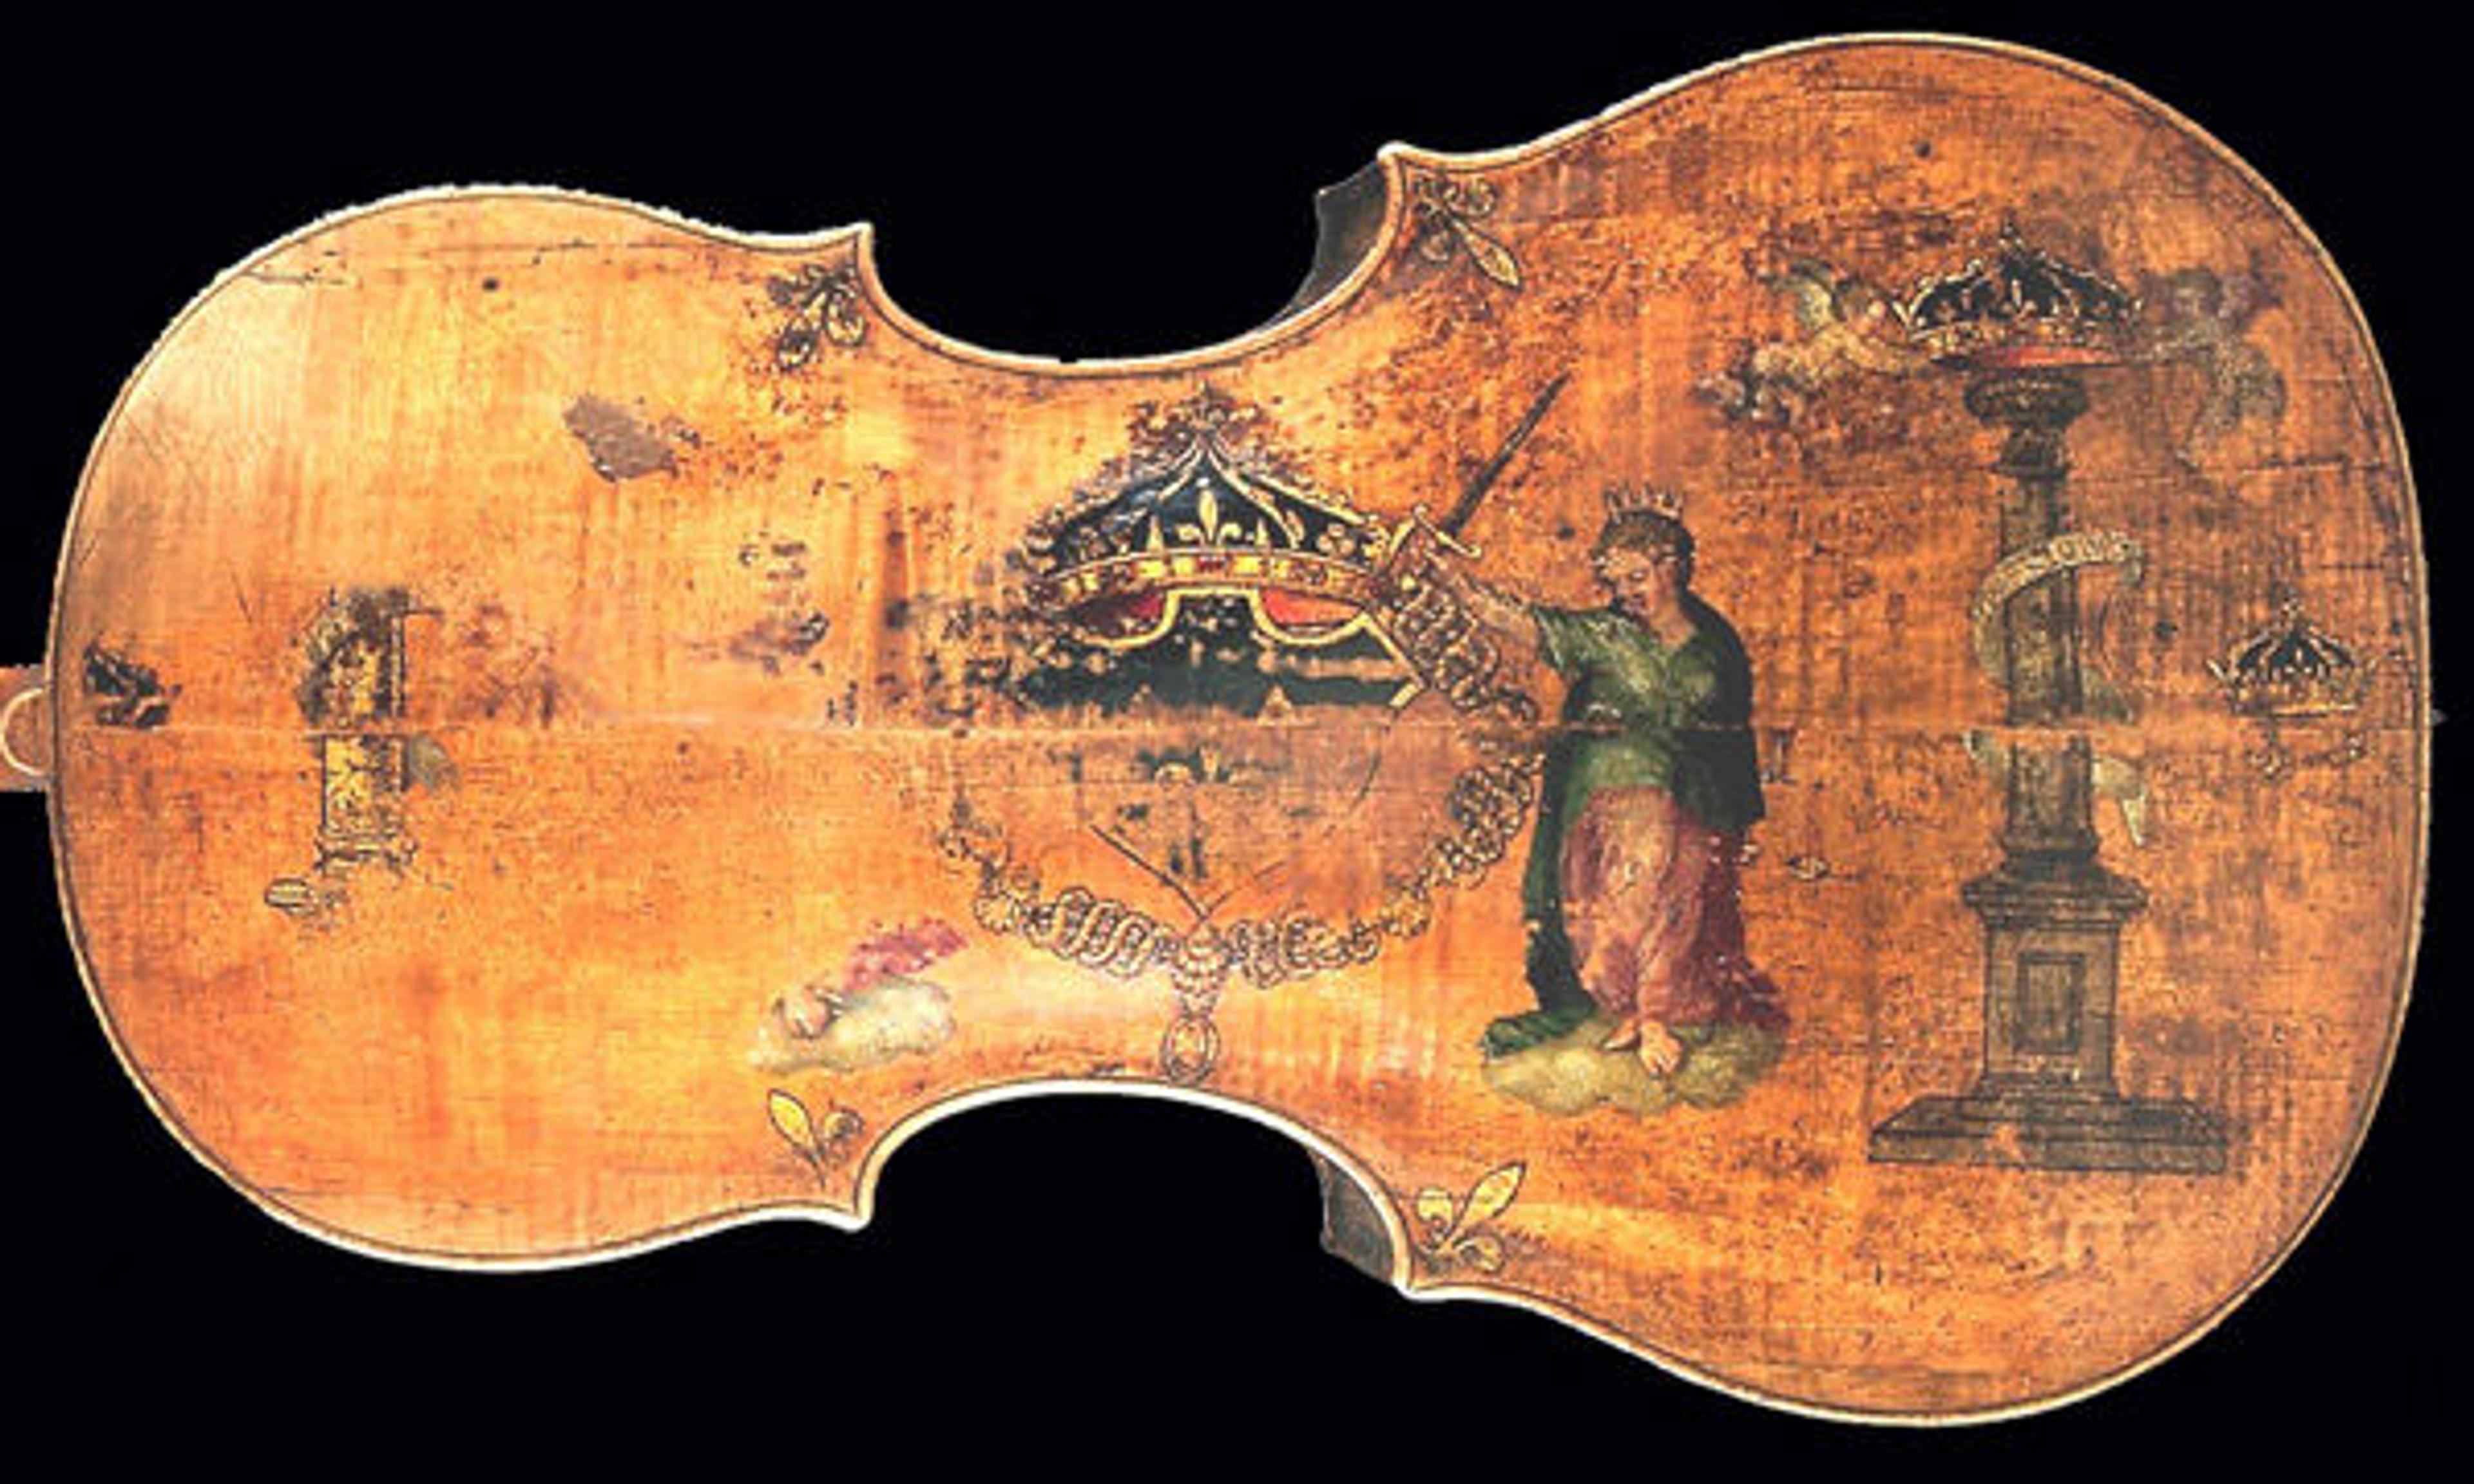 Fig. 1. Andrea Amati (Italian, ca. 1505–1578). Violoncello, "The King" (detail), mid-16th century. National Music Museum, Vermillion, South Dakota, Witten-Rawlins Collection, 1984 (NMM 3351)